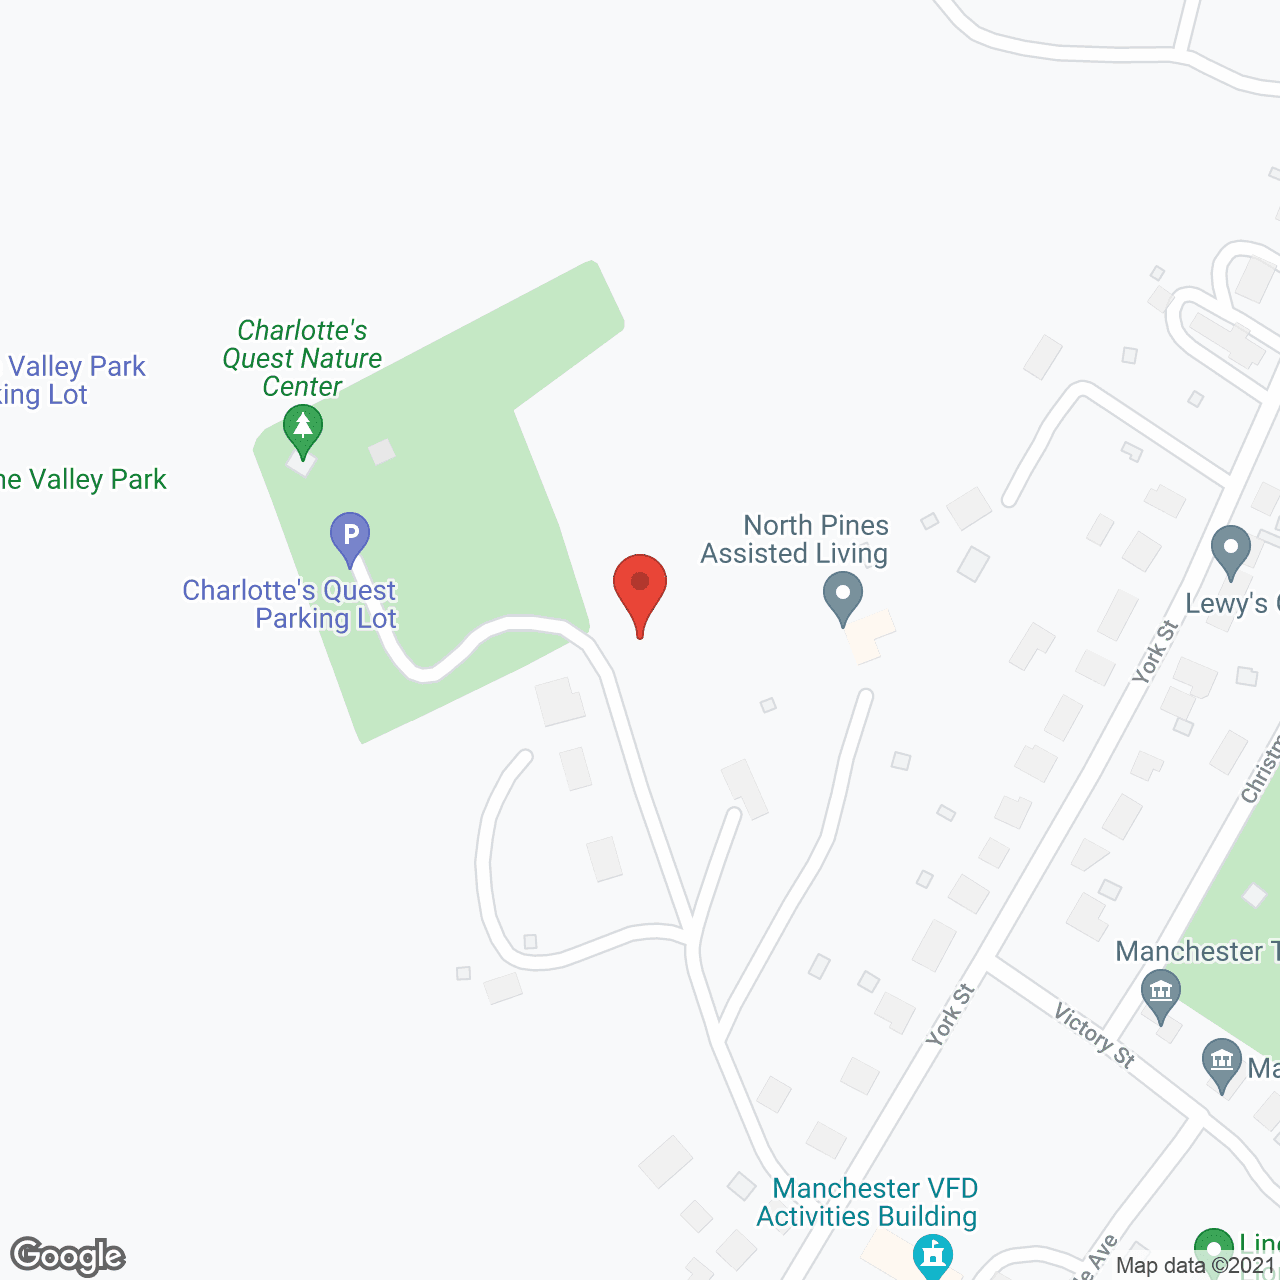 North Pines Assisted Living in google map